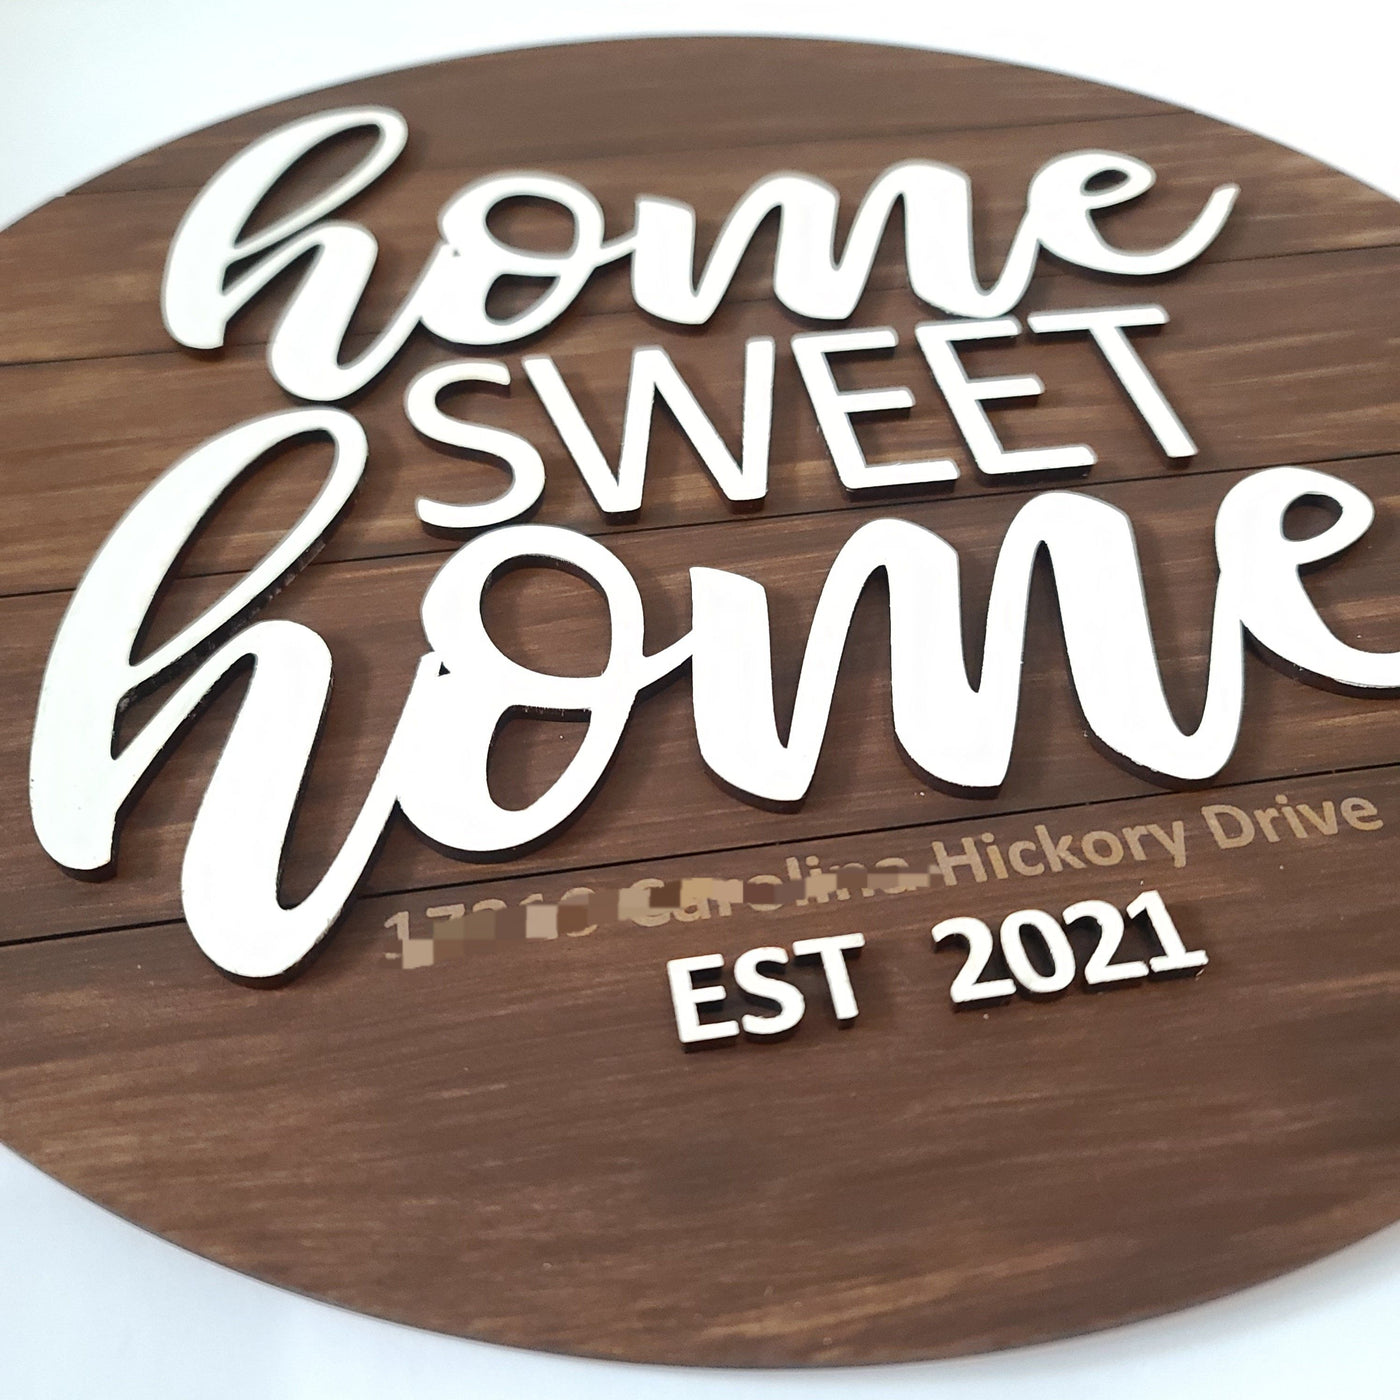 Home sweet home laser cut round shiplap sign with engraved address and established year. Round shiplap painted brown with white script and print letters saying "home sweet home". White letters are attached on top of round shiplap creating a 3D element.